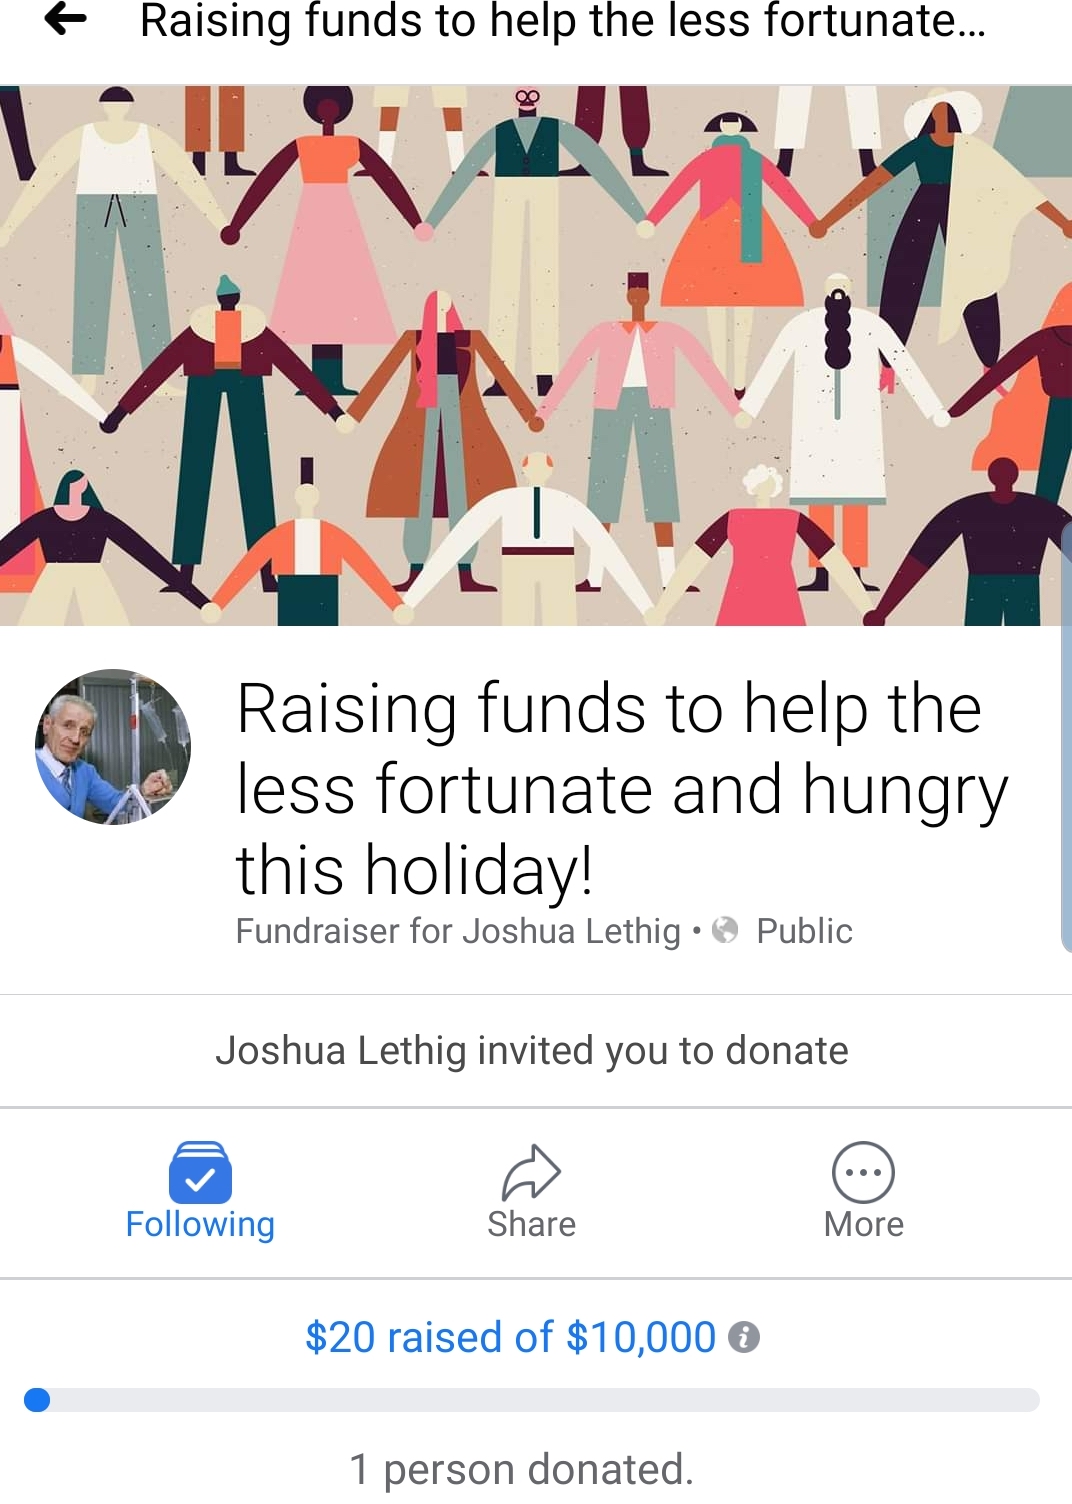 Fundraising - Raising funds to help the less fortunate... Raising funds to help the less fortunate and hungry this holiday! Fundraiser for Joshua Lethig. Public Joshua Lethig invited you to donate ing More $20 raised of $10,000 6 1 person donated